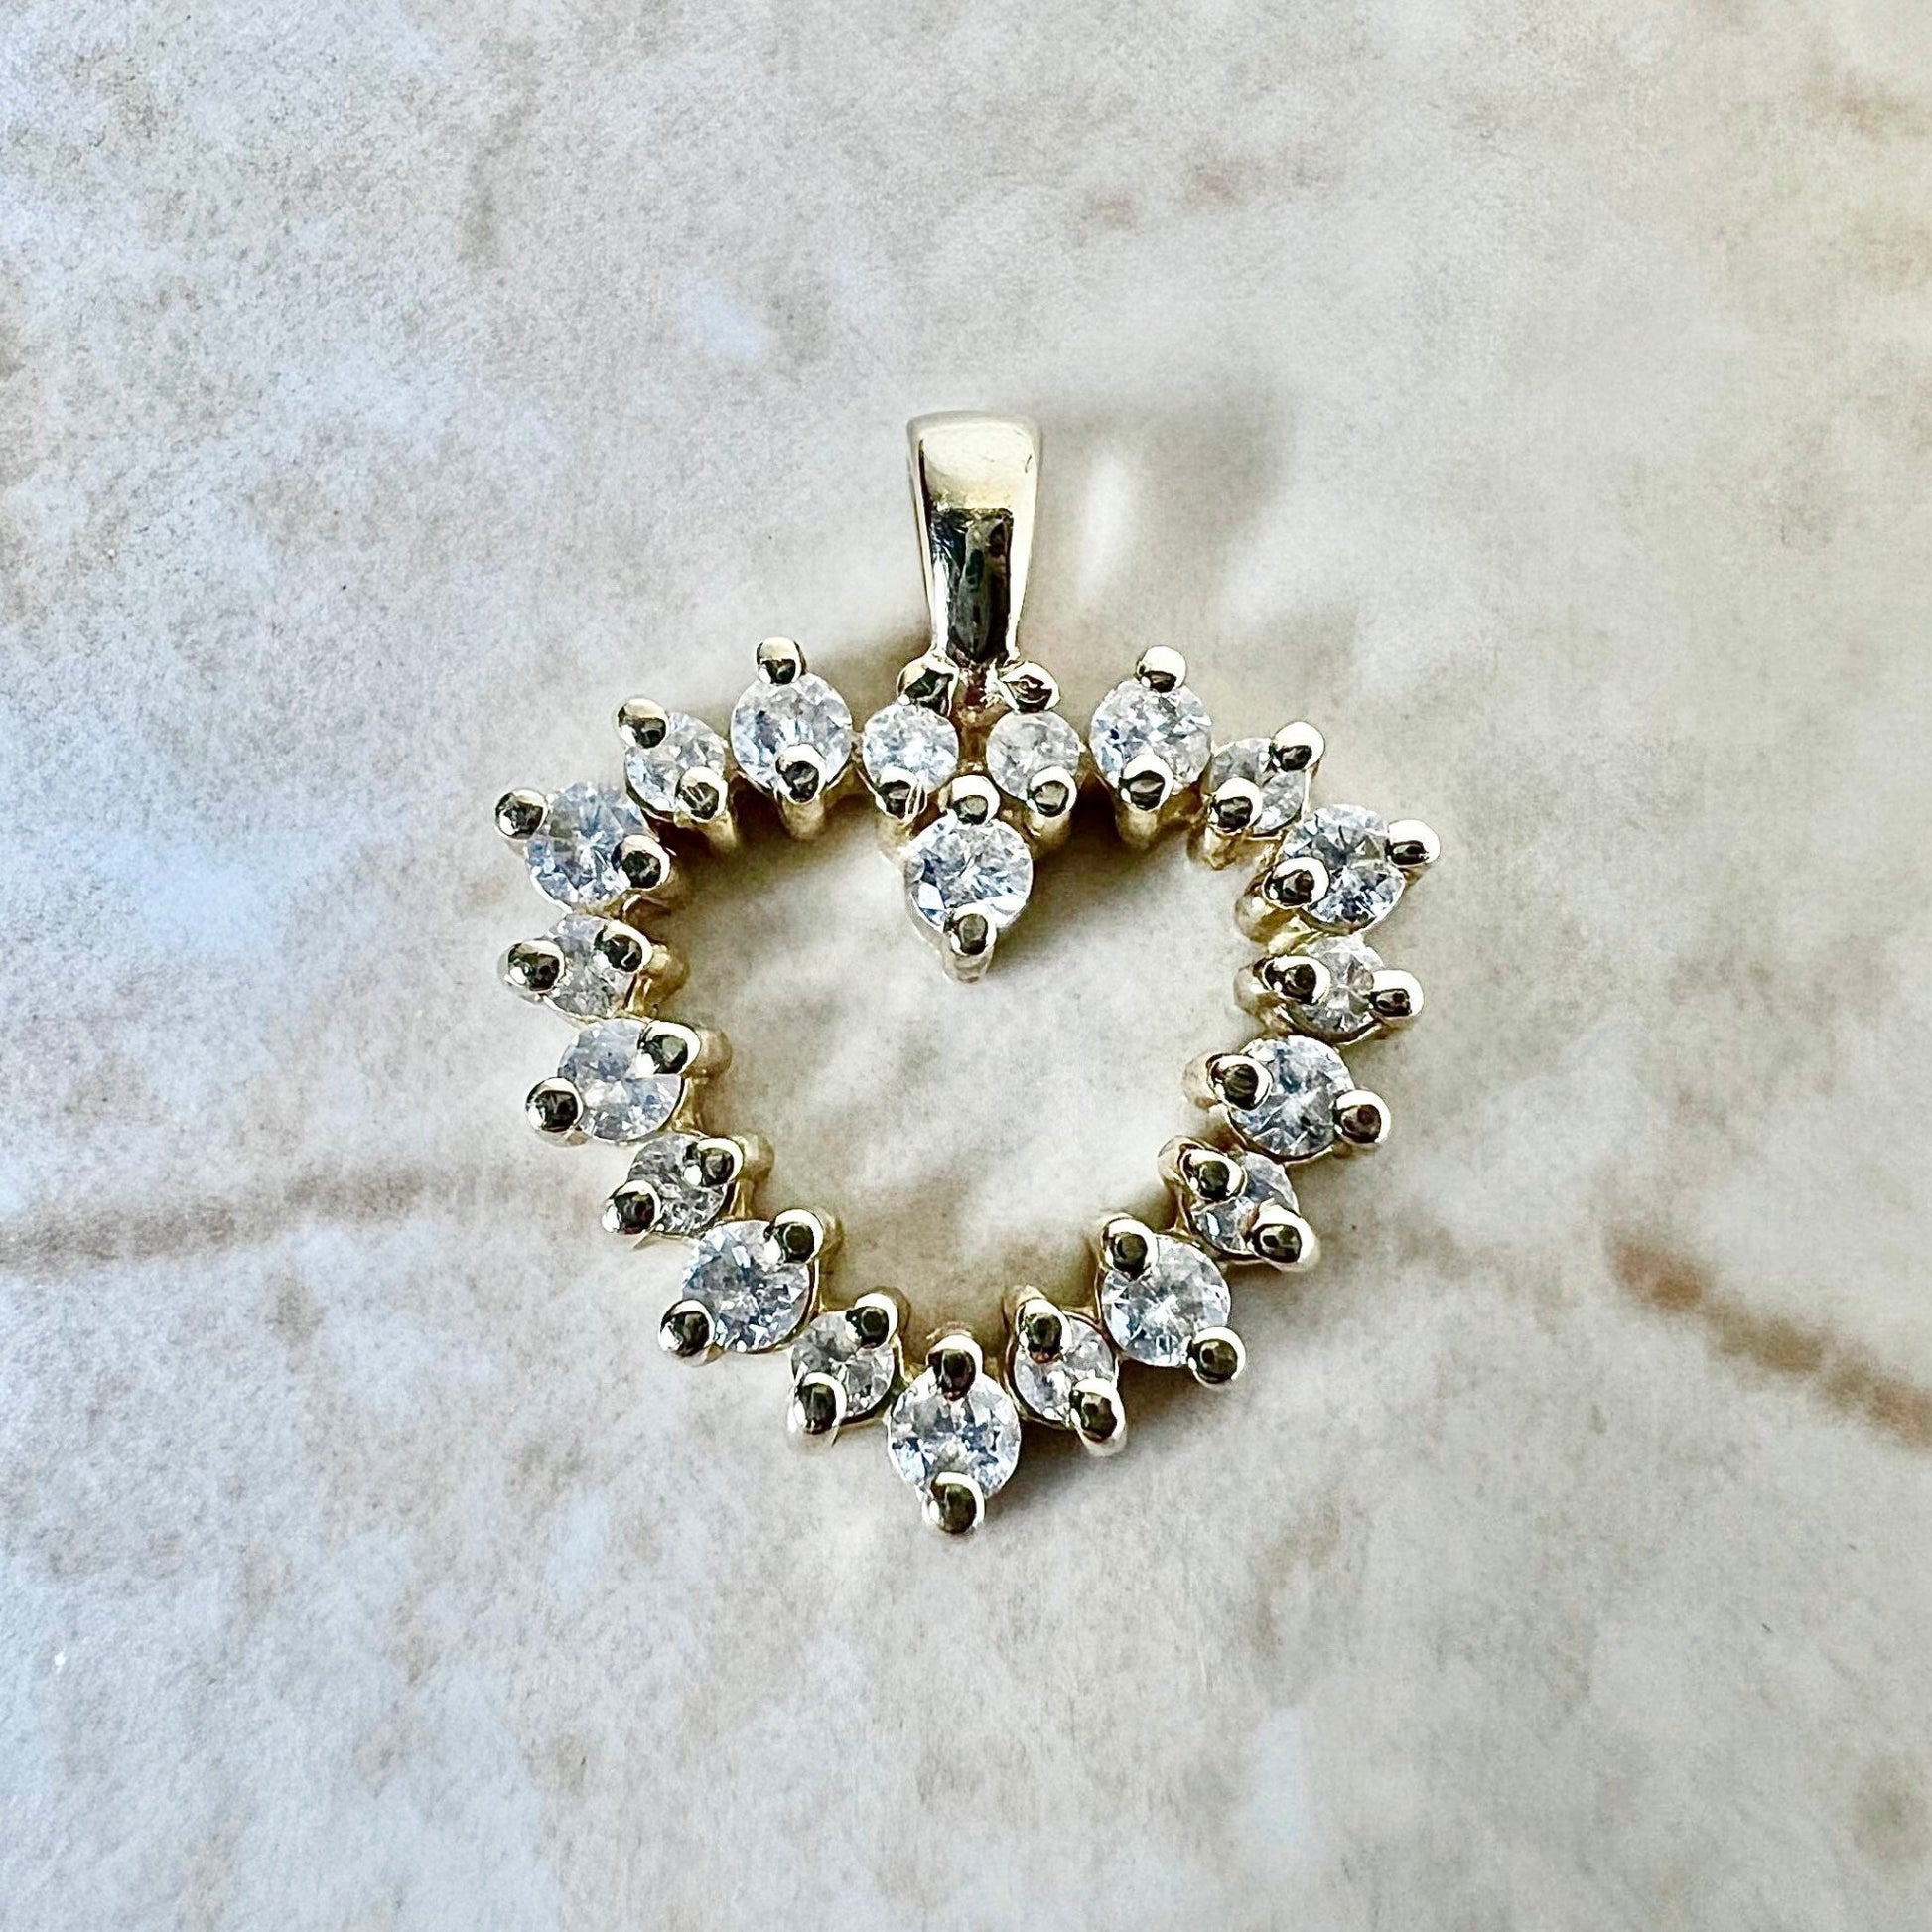 14K Diamond Heart Pendant Necklace 0.50 CTTW - Yellow Gold Diamond Pendant - Heart Necklace - Valentine’s Day Gift For Her - Birthday Gift